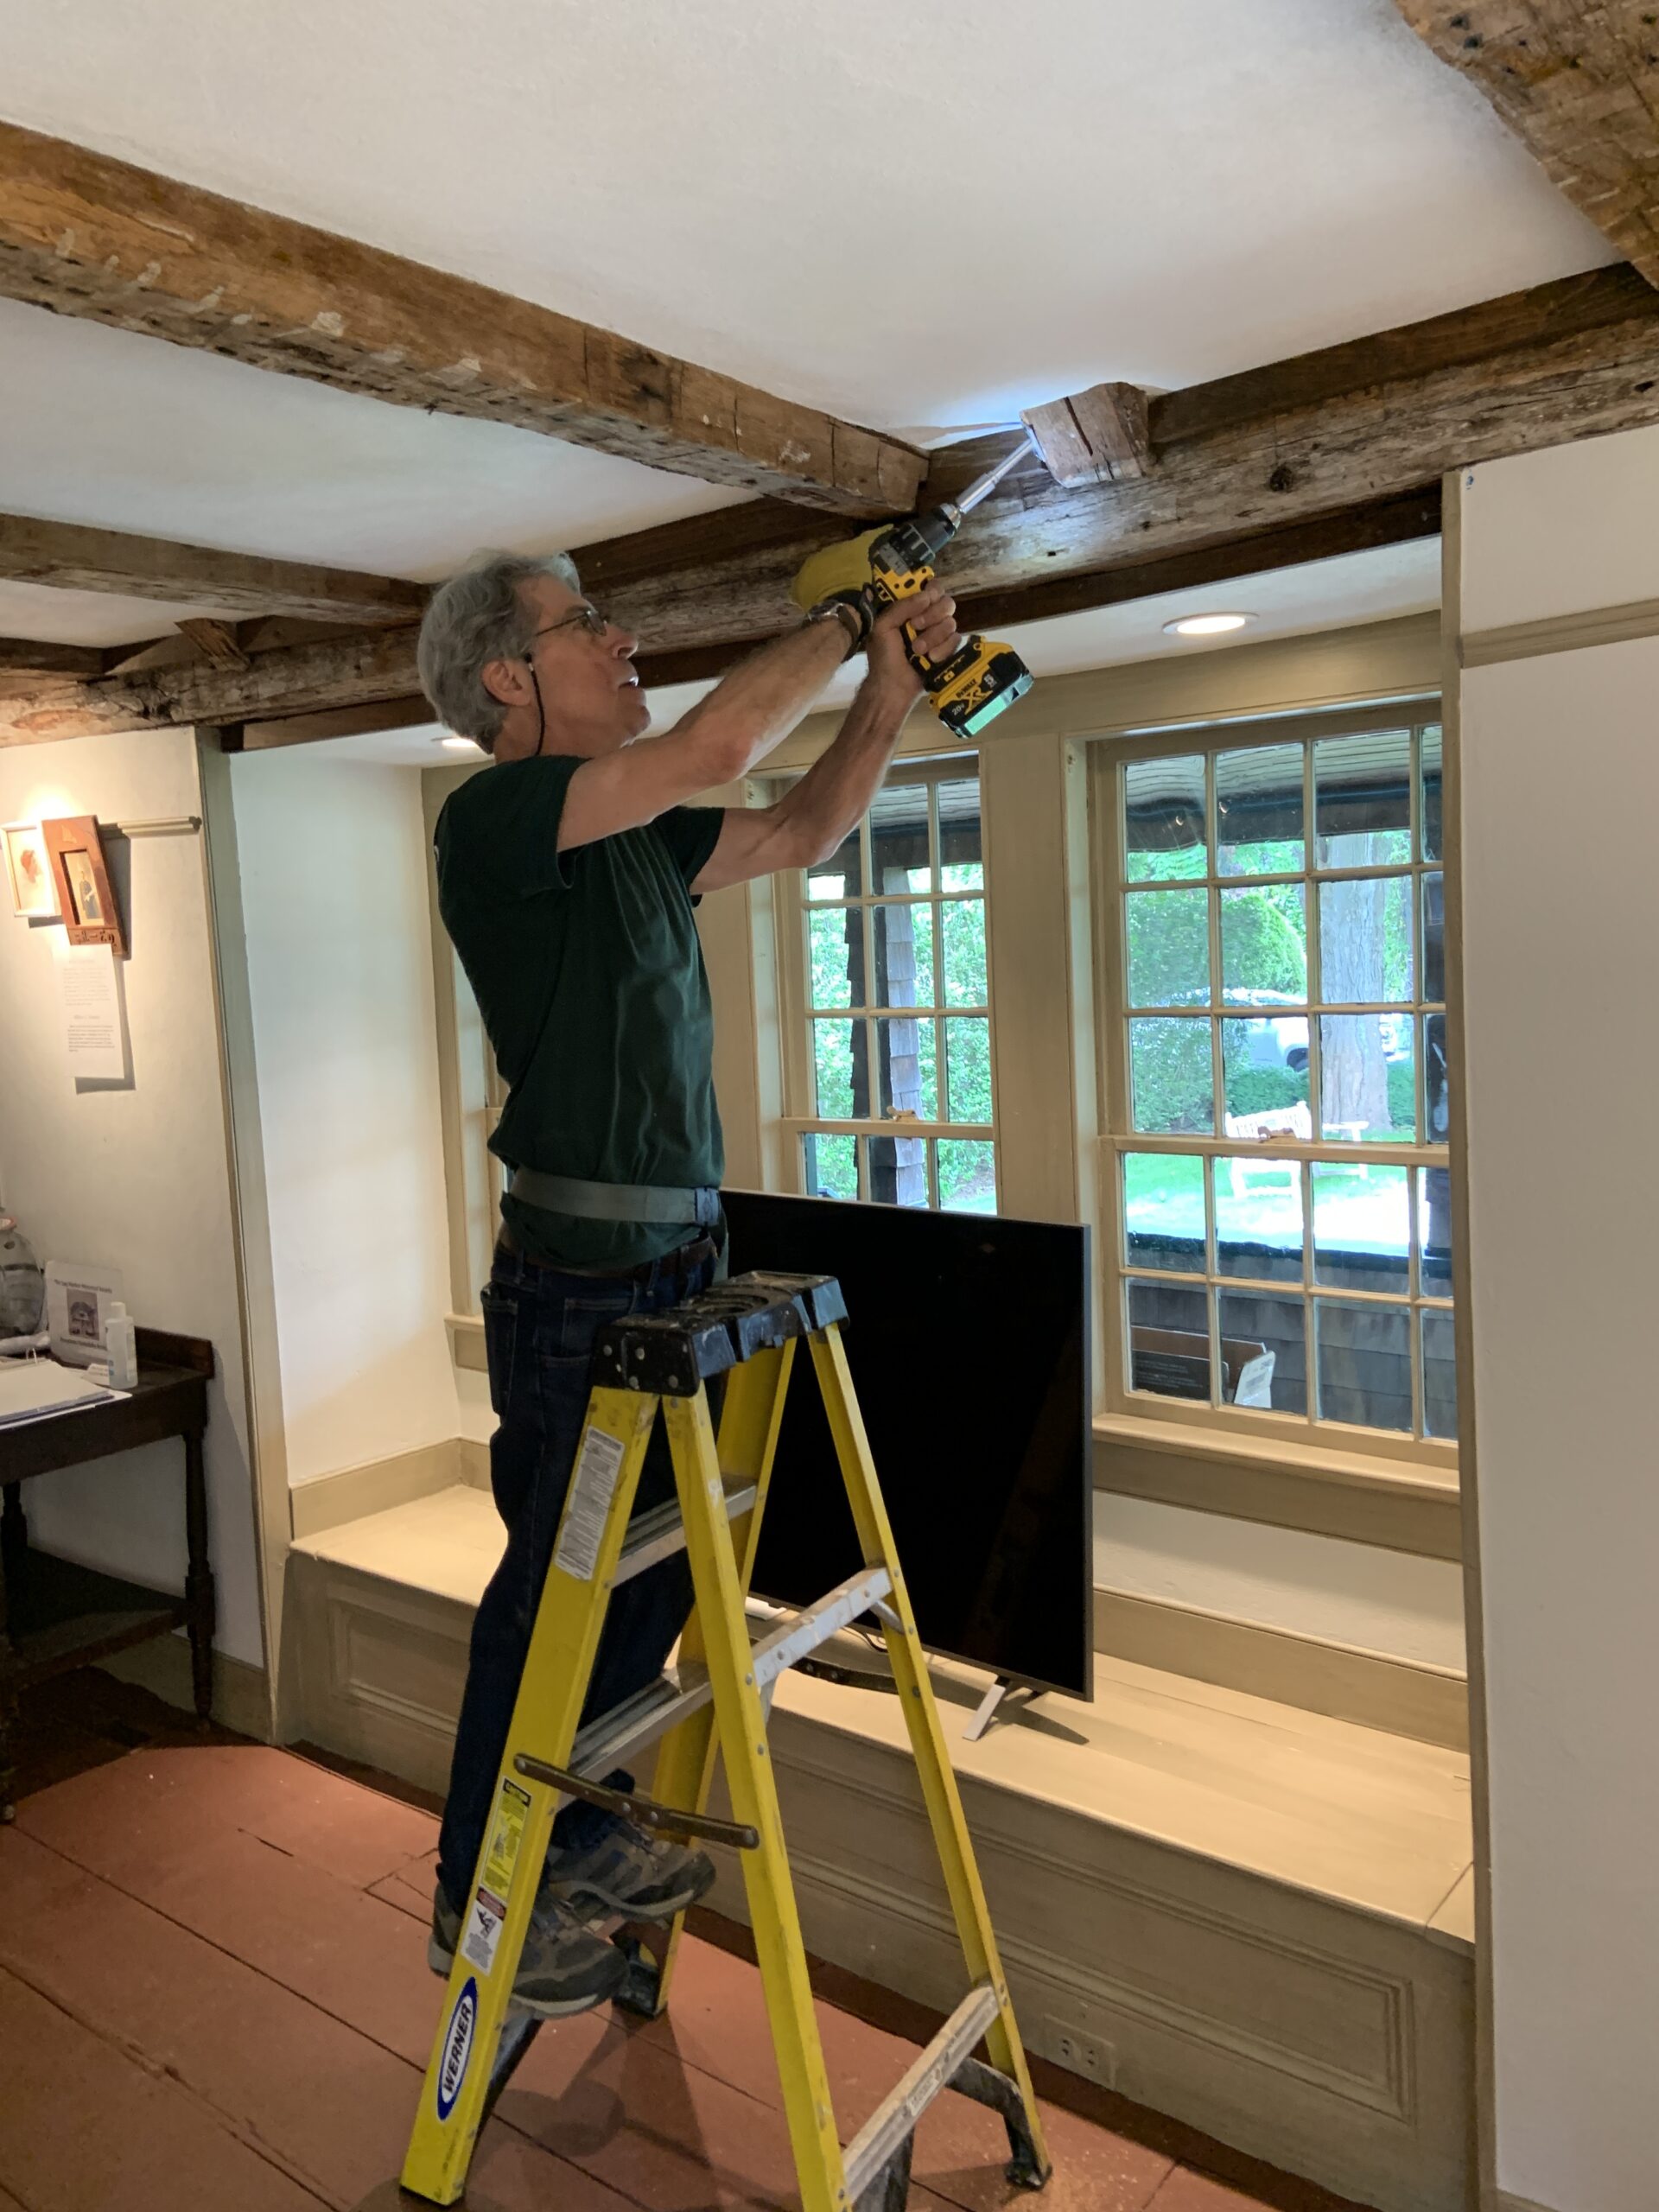 Bill Flynt removes a sample from a wood beam in the Sag Harbor Historical Society's Annie Cooper Boyd House. STEPHEN J. KOTZ